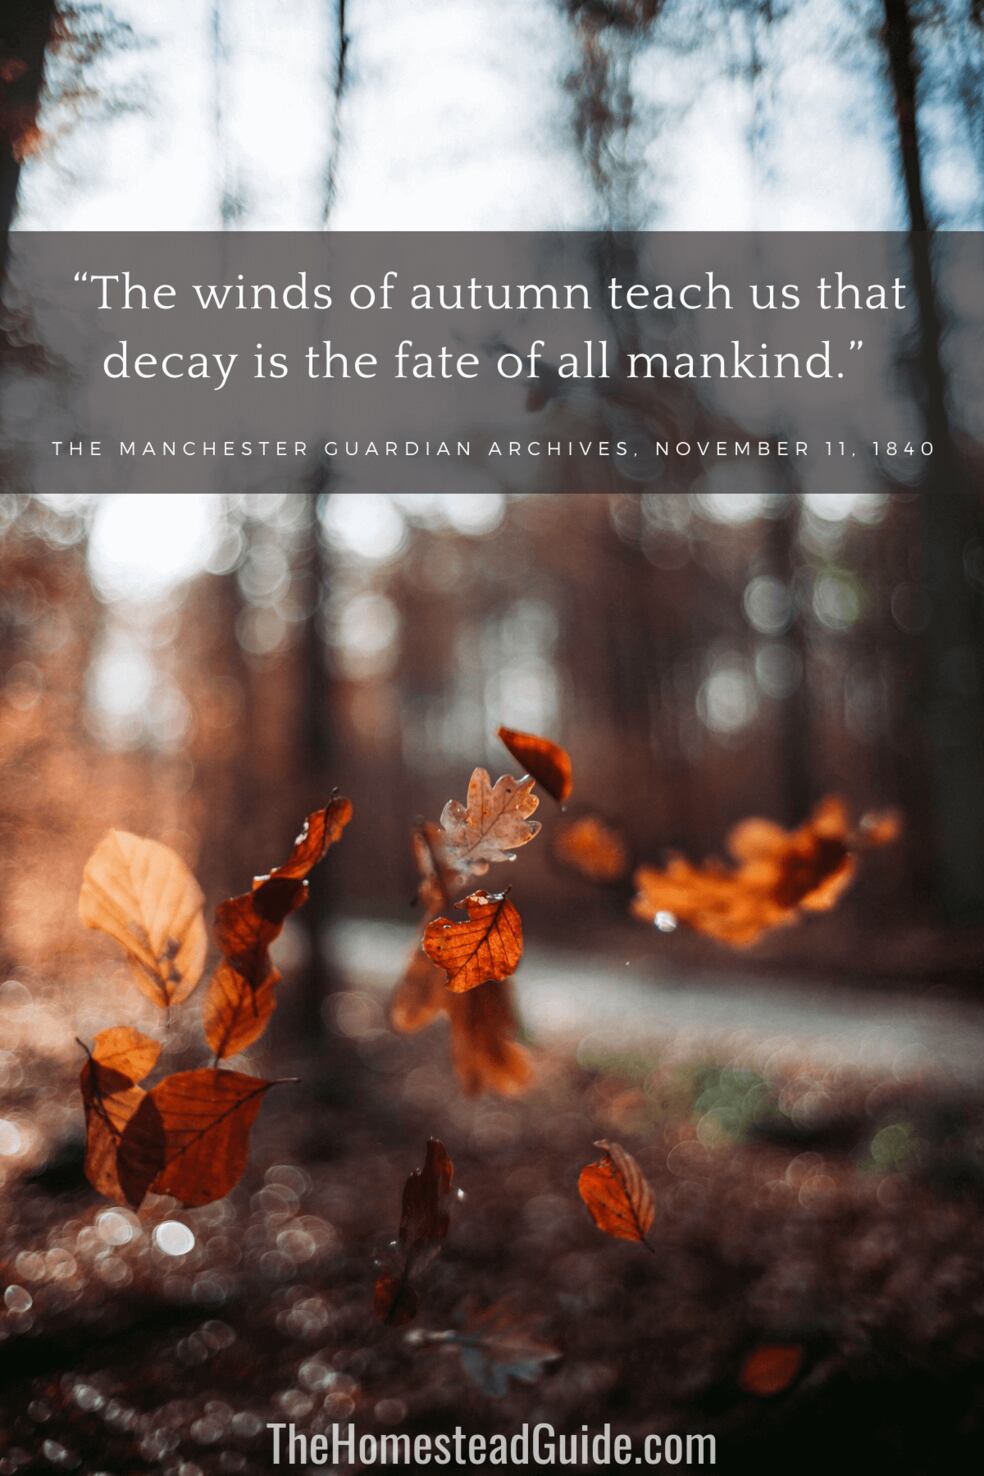 The winds of autumn teach us that decay is the fate of all mankind.